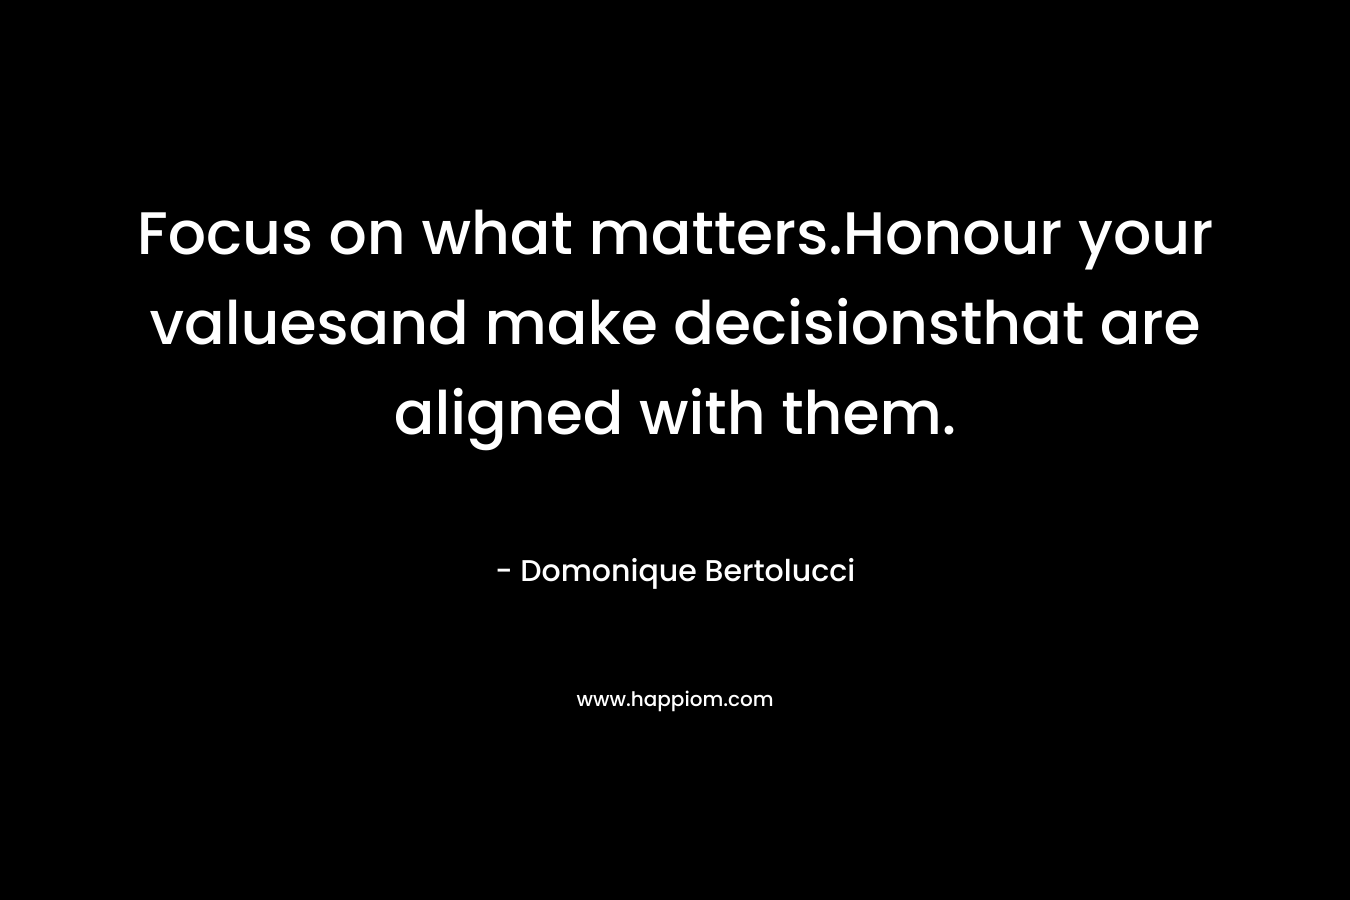 Focus on what matters.Honour your valuesand make decisionsthat are aligned with them.